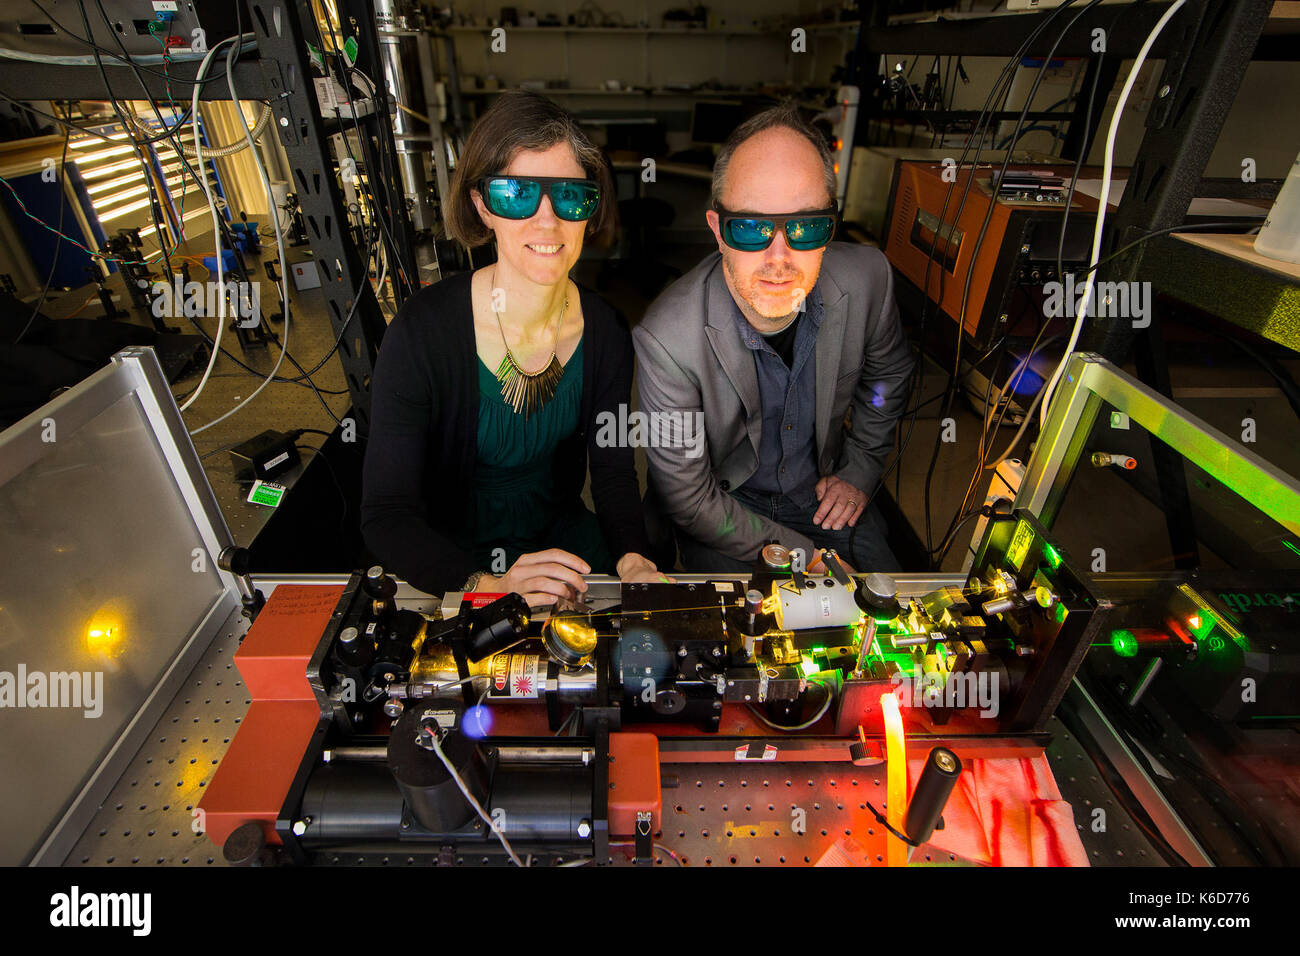 Canberra, Canberra. 6th Sep, 2017. Doctor Rose Ahlefeldt (L) and Associate Professor Matthew Sellars try to operate a high resolution dye laser, which they use to study rare earth crystals in the Australian National University (ANU), Canberra, on Sept. 6, 2017. Australian scientists have made a significant breakthrough in developing an 'unhackable' quantum internet, it was announced on Sept. 12. Credit: ANU/Stuart Hay/Xinhua/Alamy Live News Stock Photo